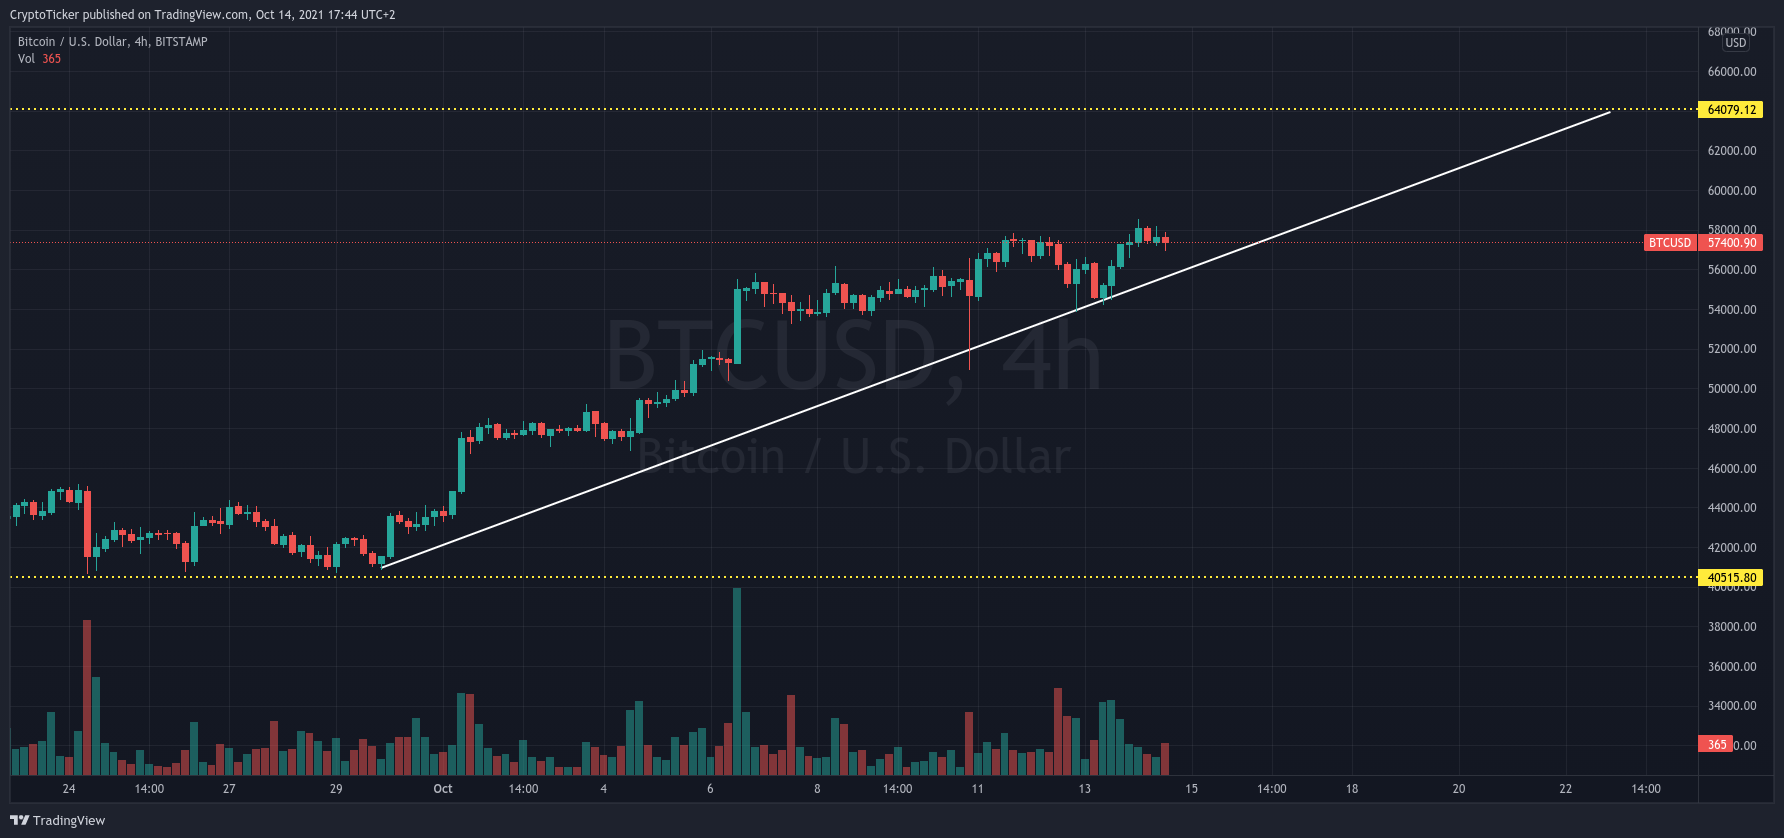 BTC/USD 4-hours chart showing Bitcoin's uptrend